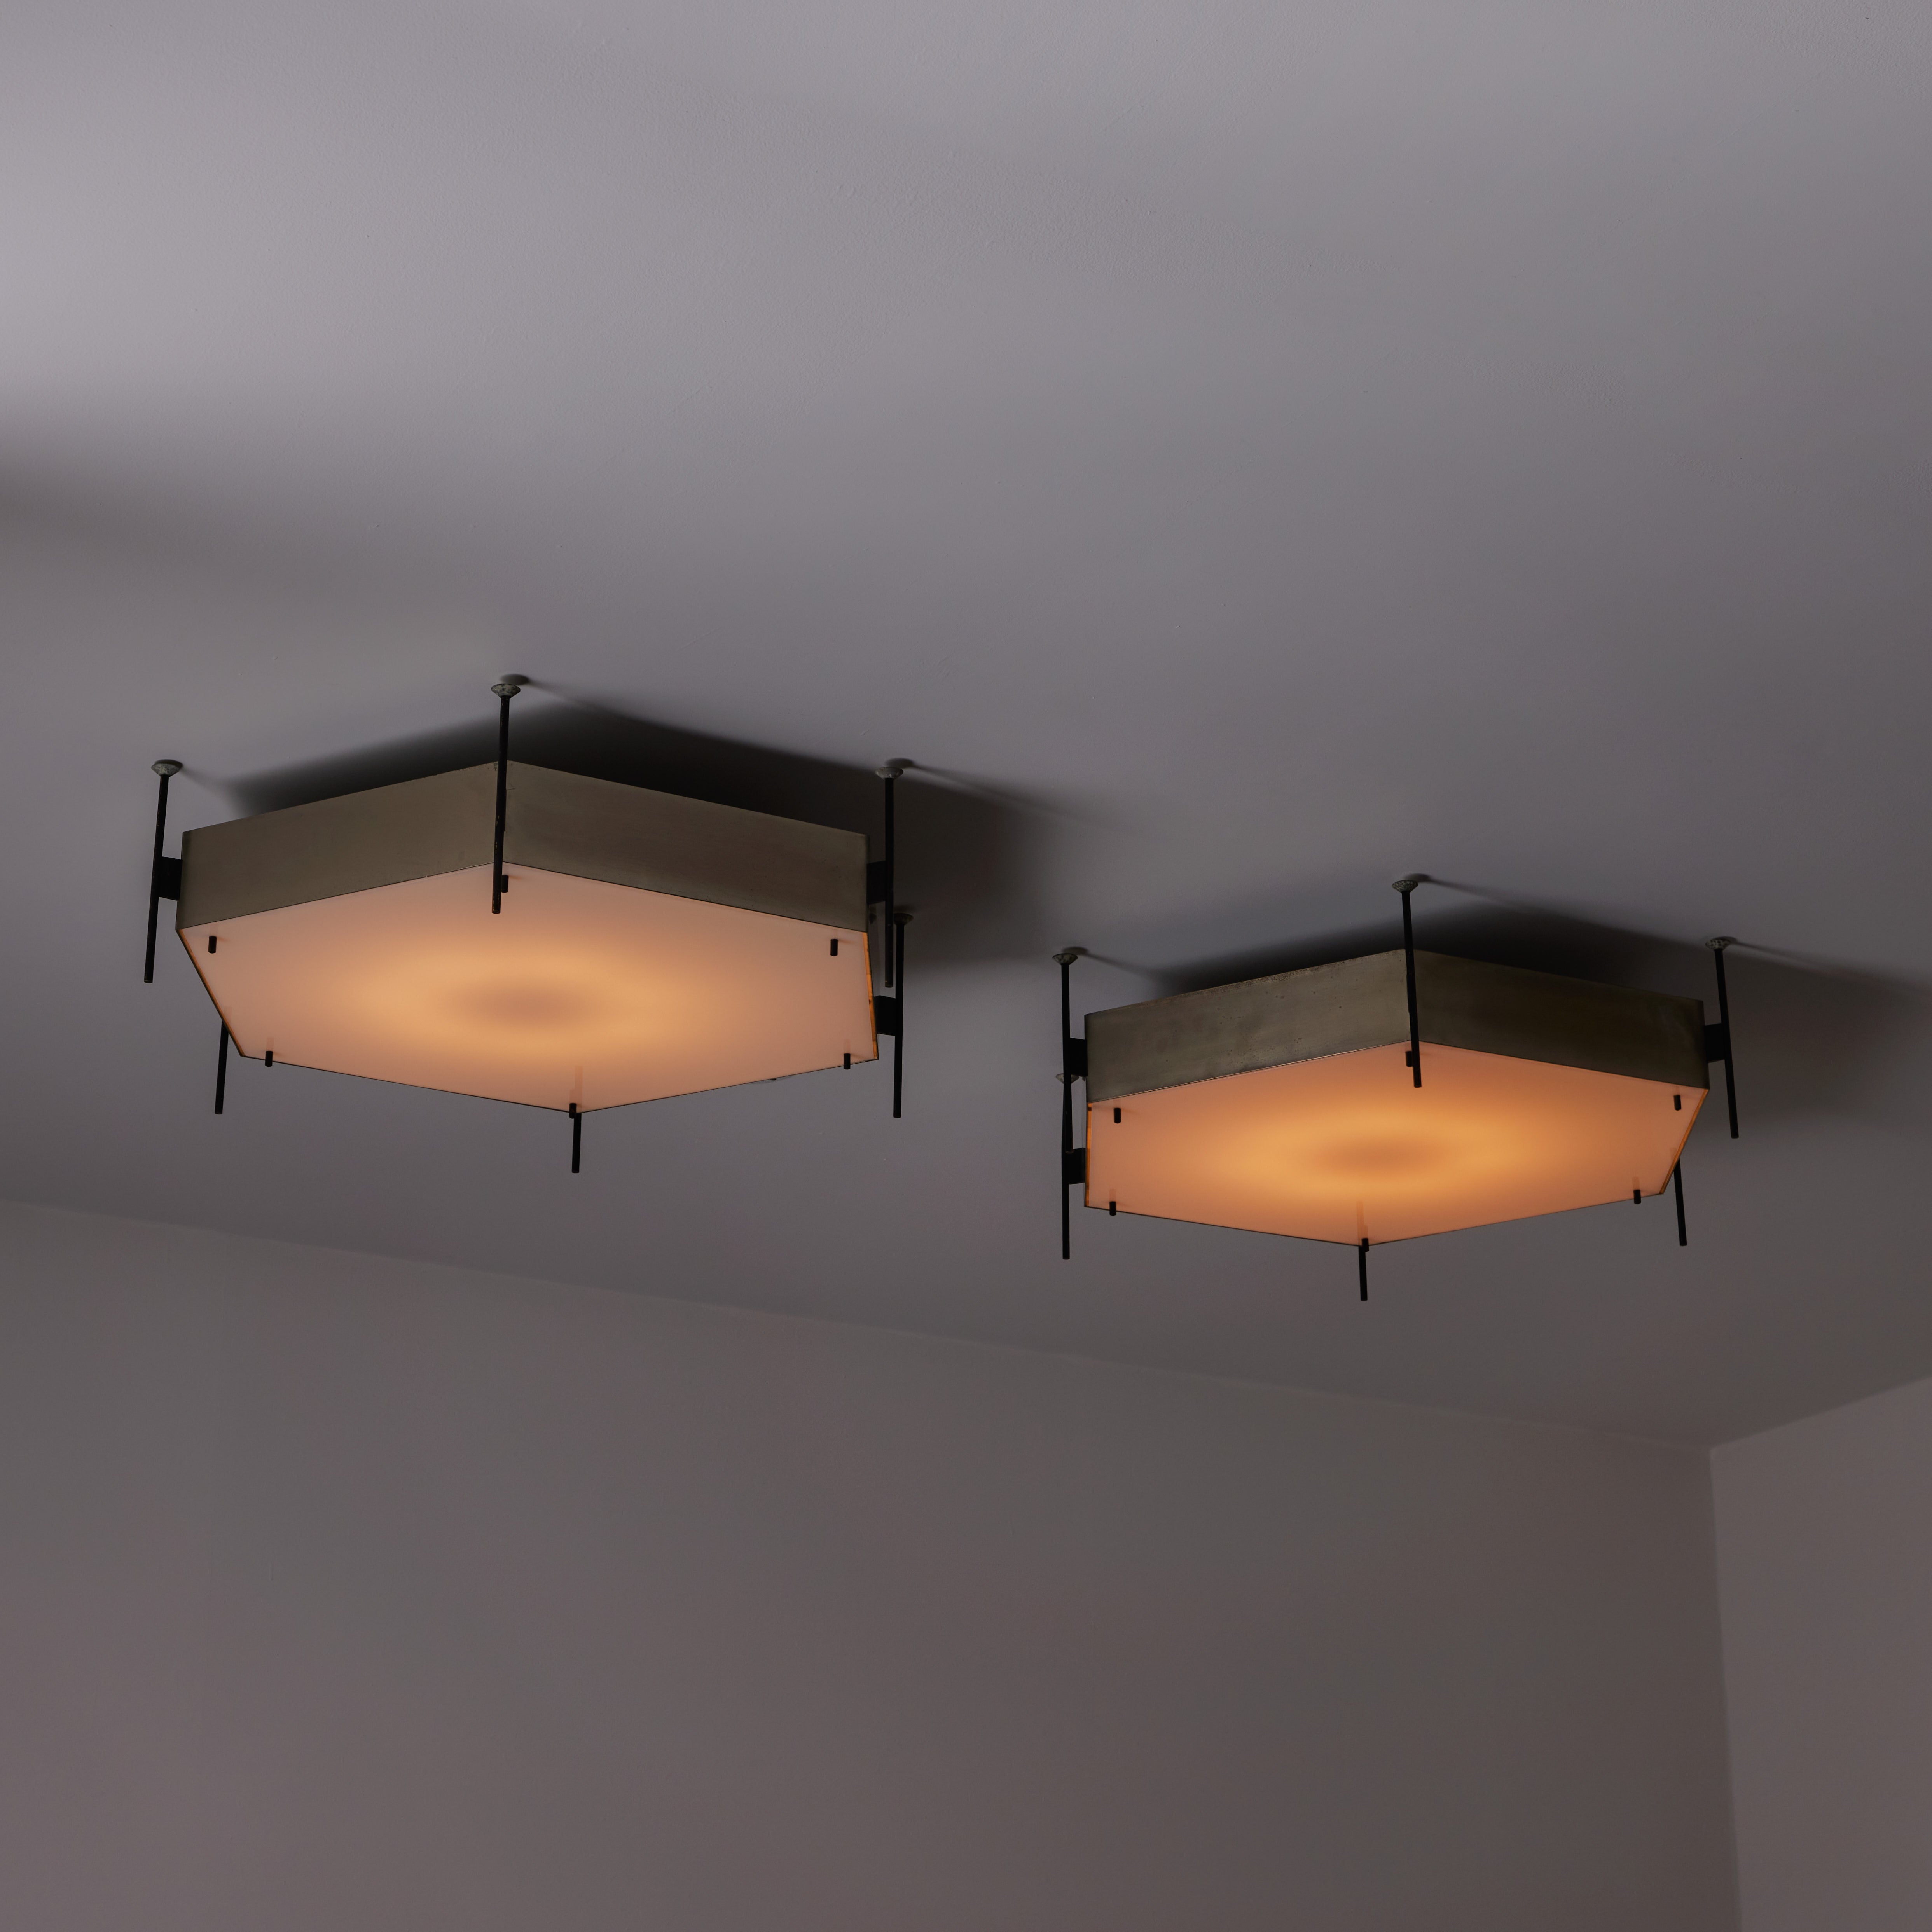 Model 12712 Ceiling Lights by Angelo Lelli for Arredoluce. Designed and manufactured in Italy, in 1958. Hexagonal mounted lights which are made of a sturdy steel hexagon frame, enameled steel accents on the exterior, and acrylic diffusers. The frame